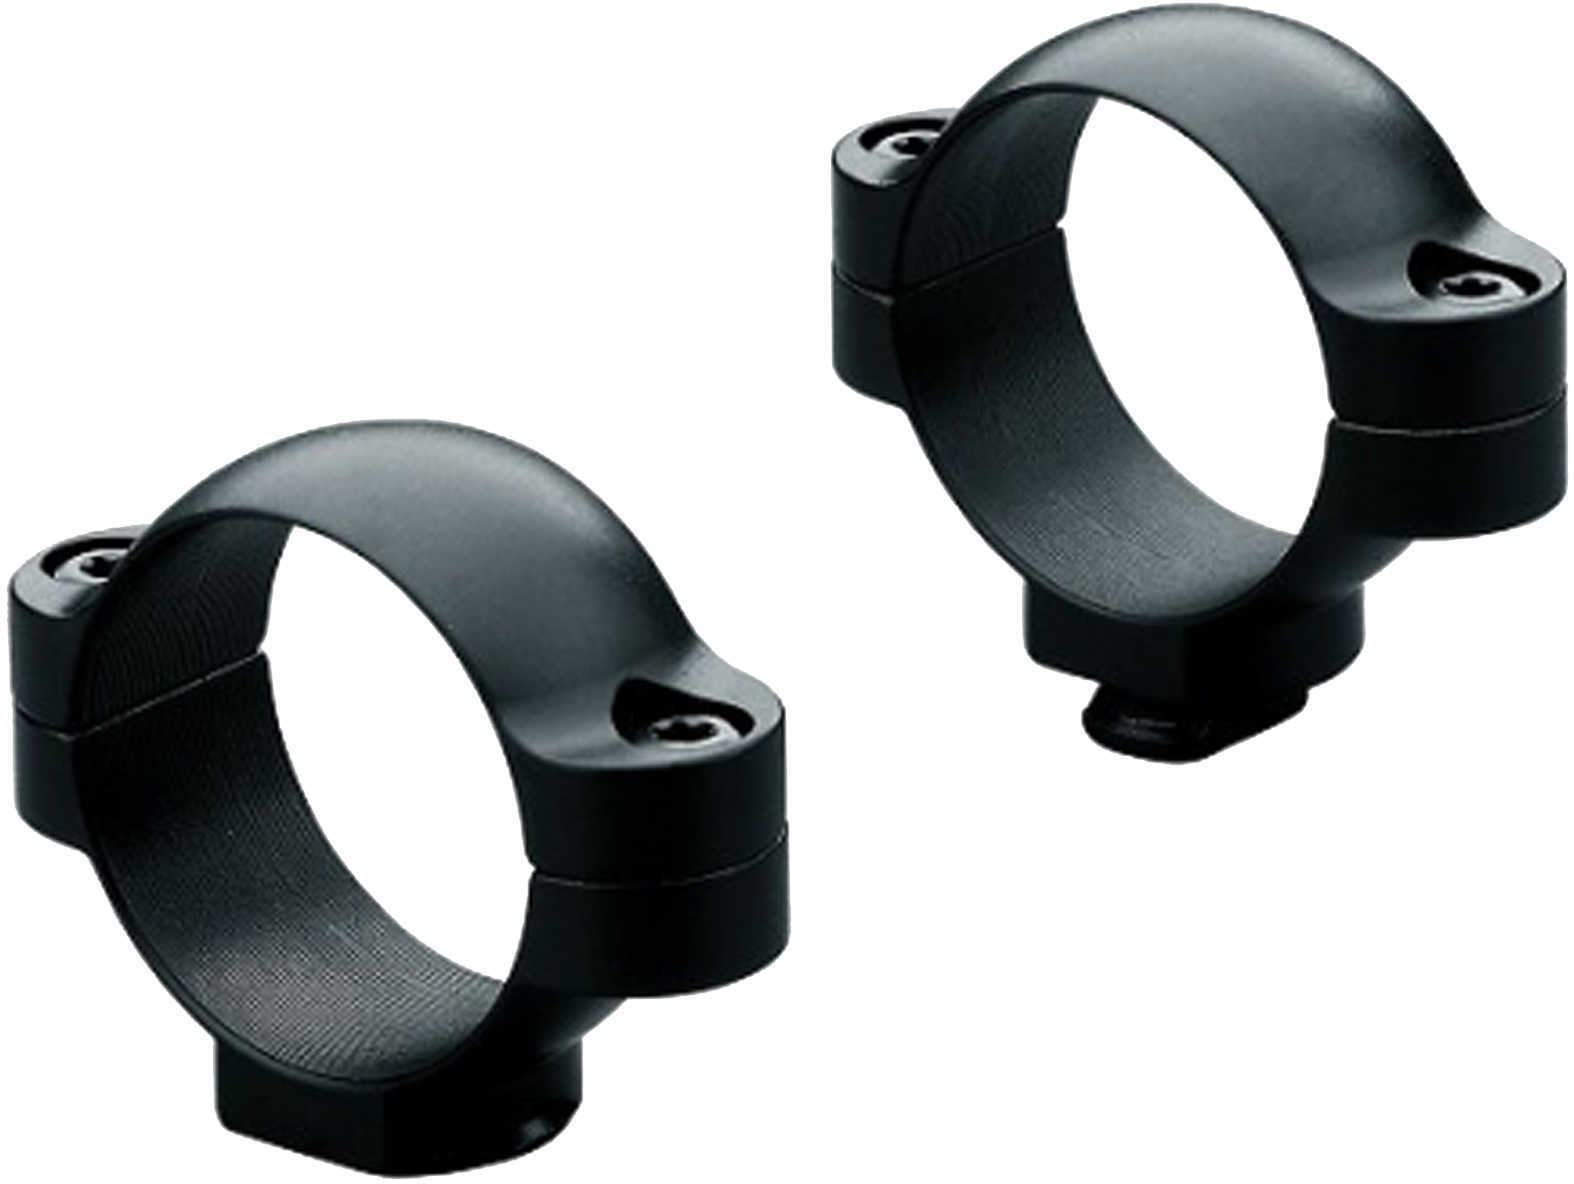 Leupold Super High Rings With Matte Black Finish Md: 51033